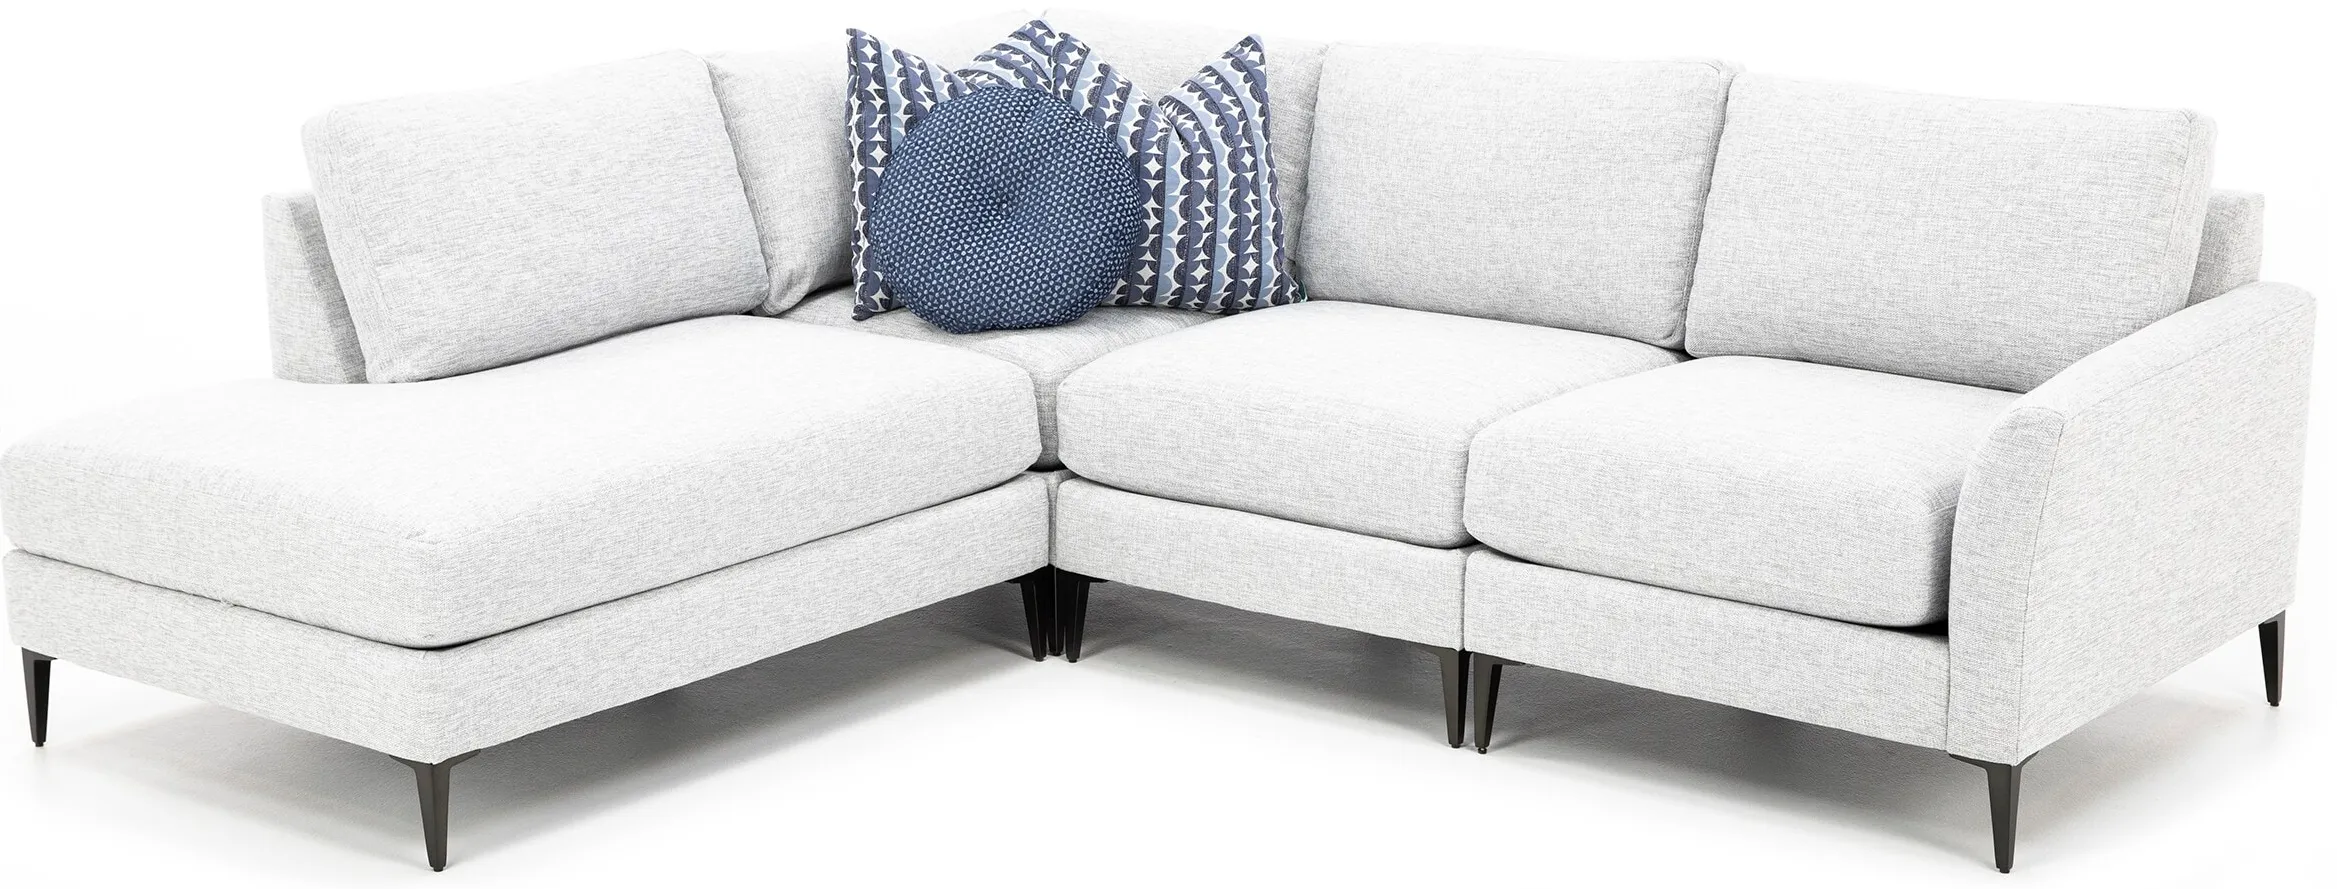 Nova 4-Pc. Sectional With Three Pillows